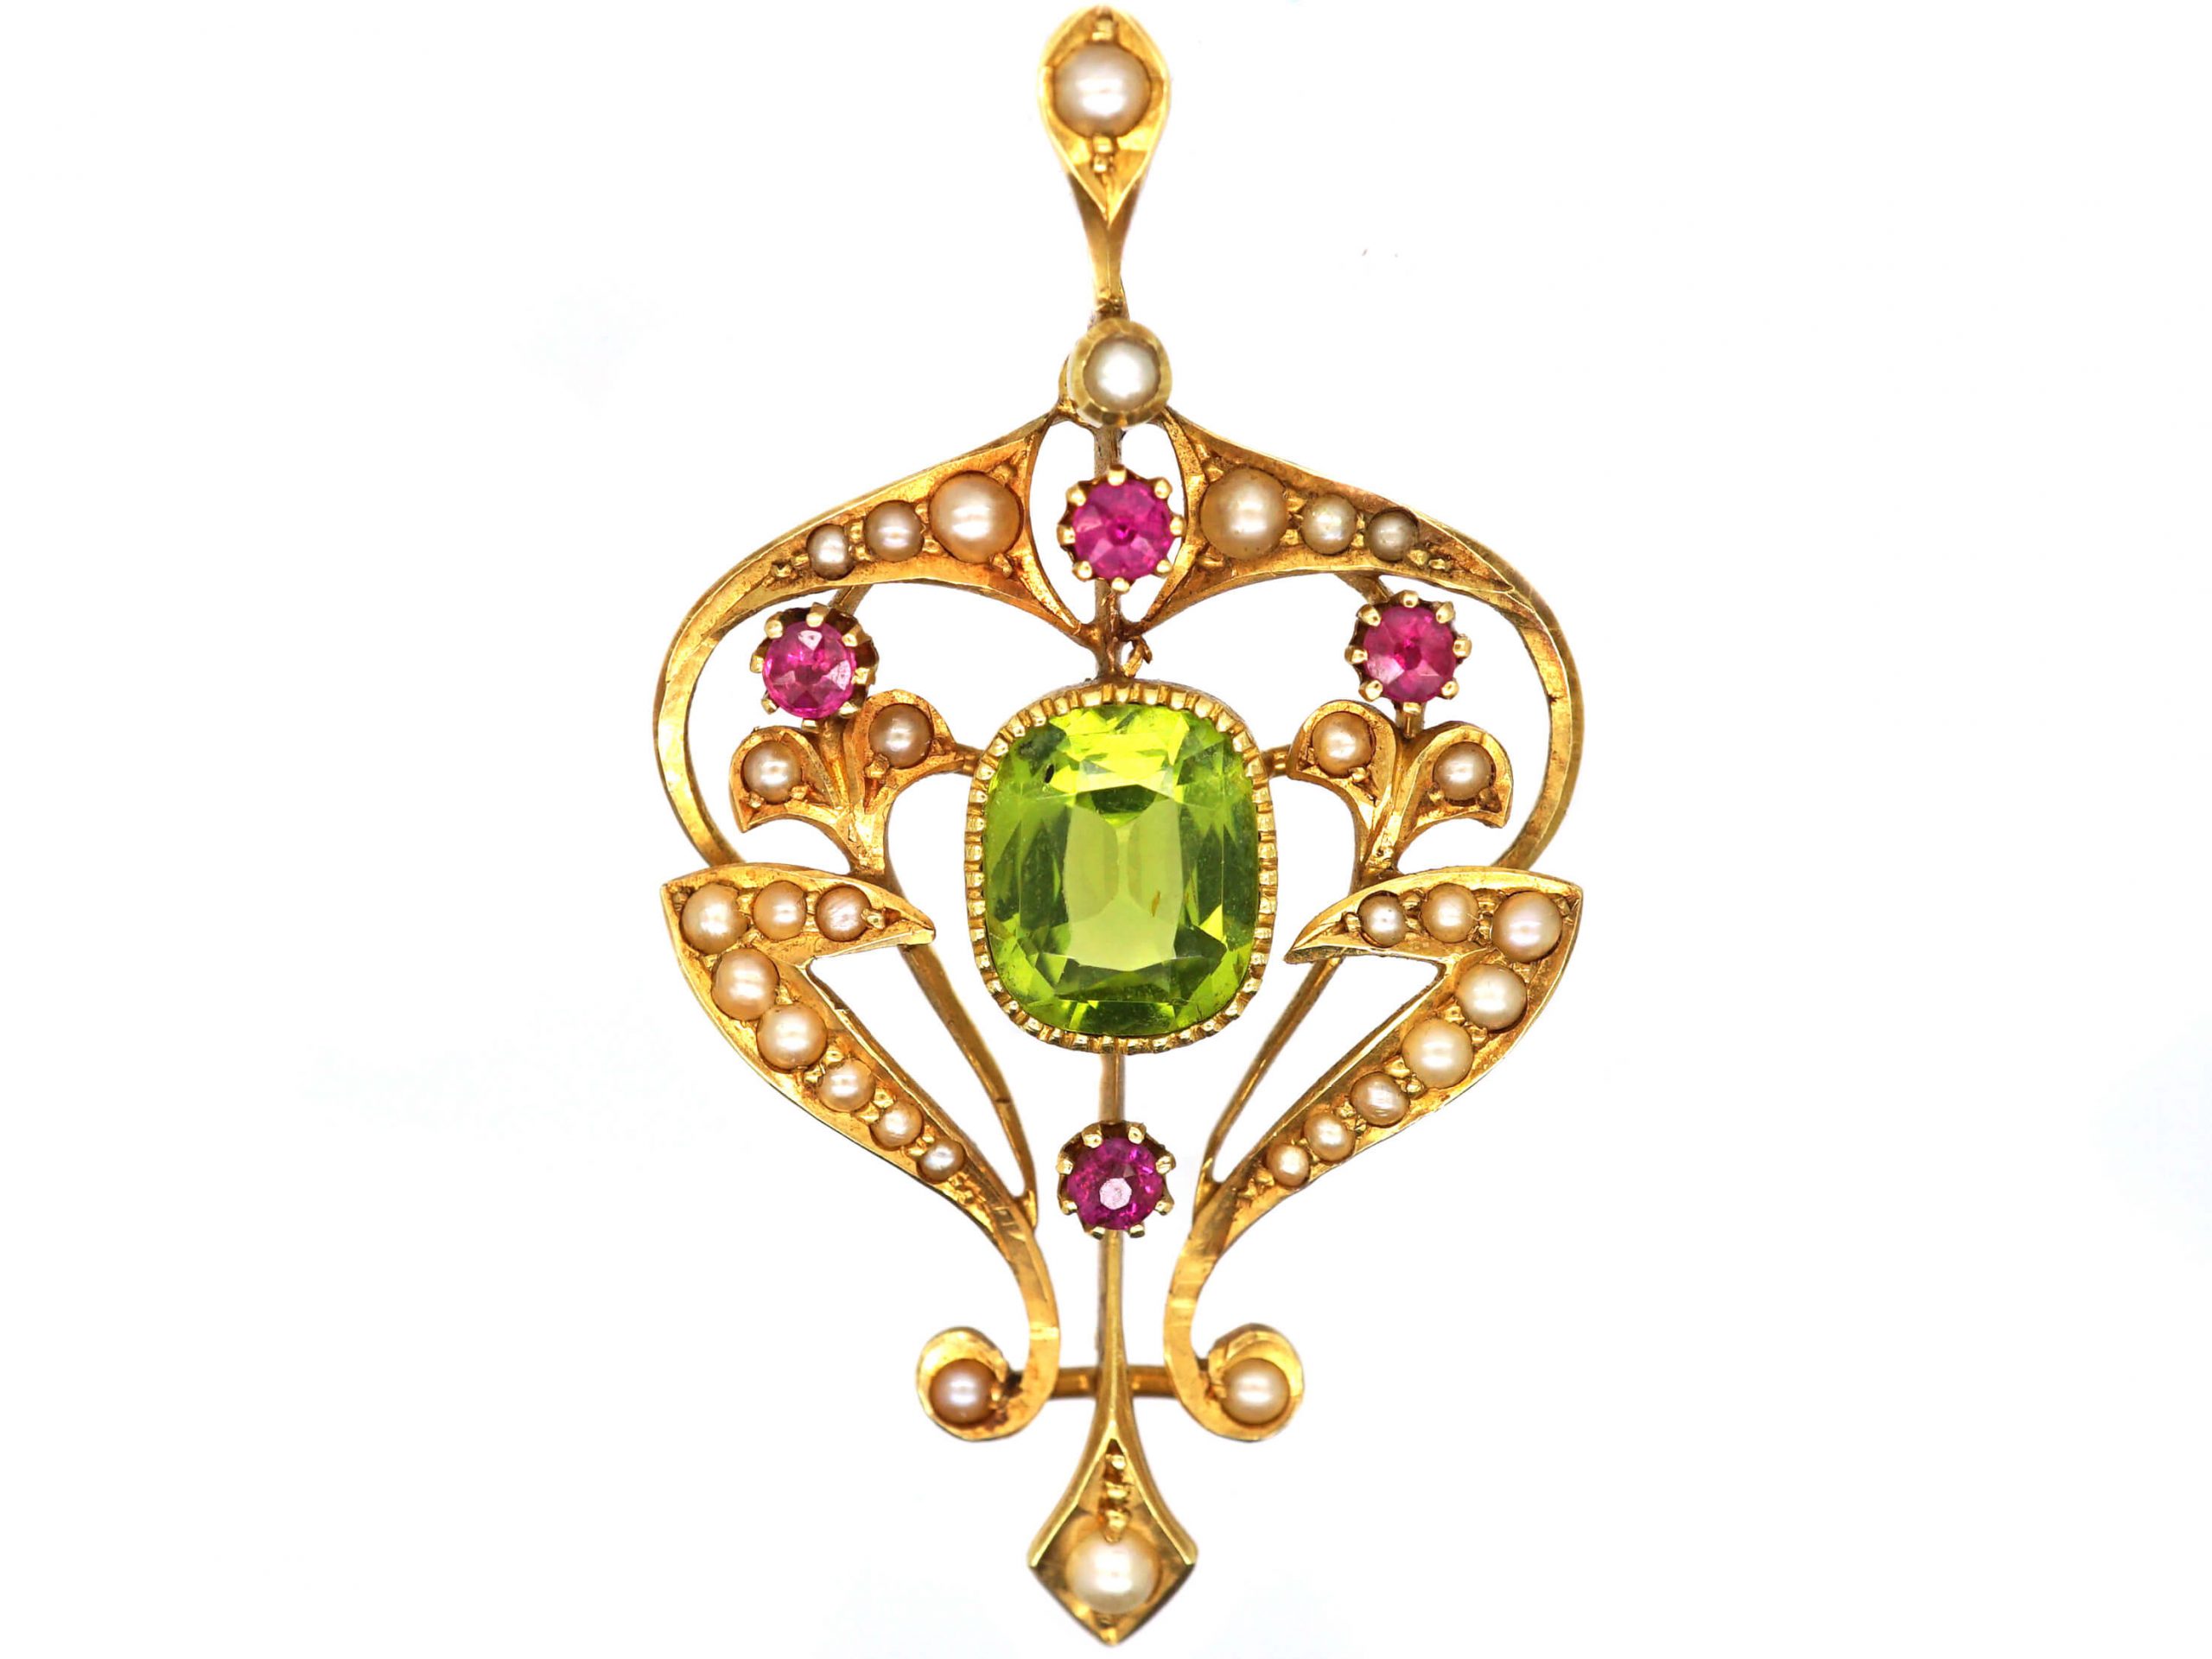 Edwardian 15ct Gold Suffragette Pendant () | The Antique Jewellery Company